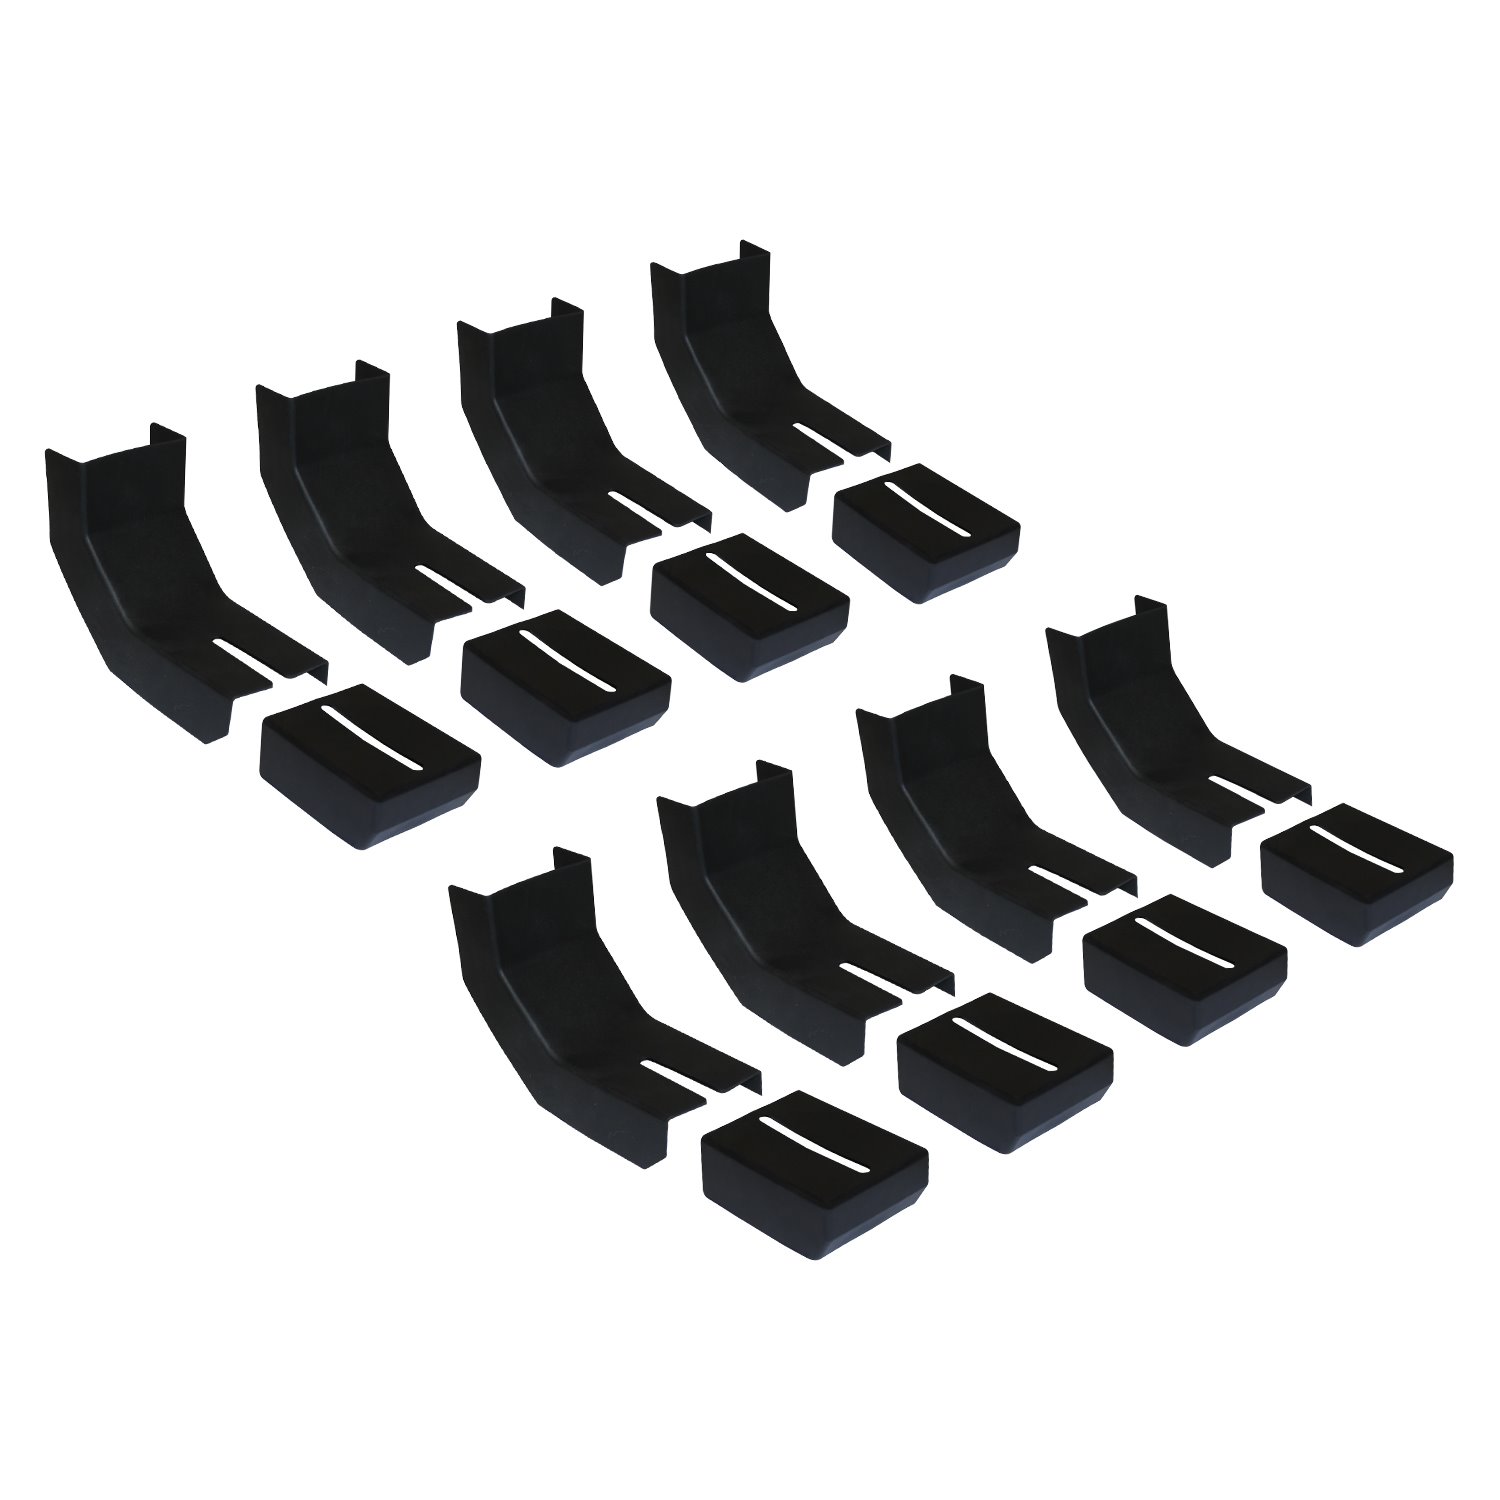 RB-BKC8 Raptor Series Bracket Covers Thermoplastic Rubber for Raptor Series Slide Track Running Boards Only, Qty 8 Set